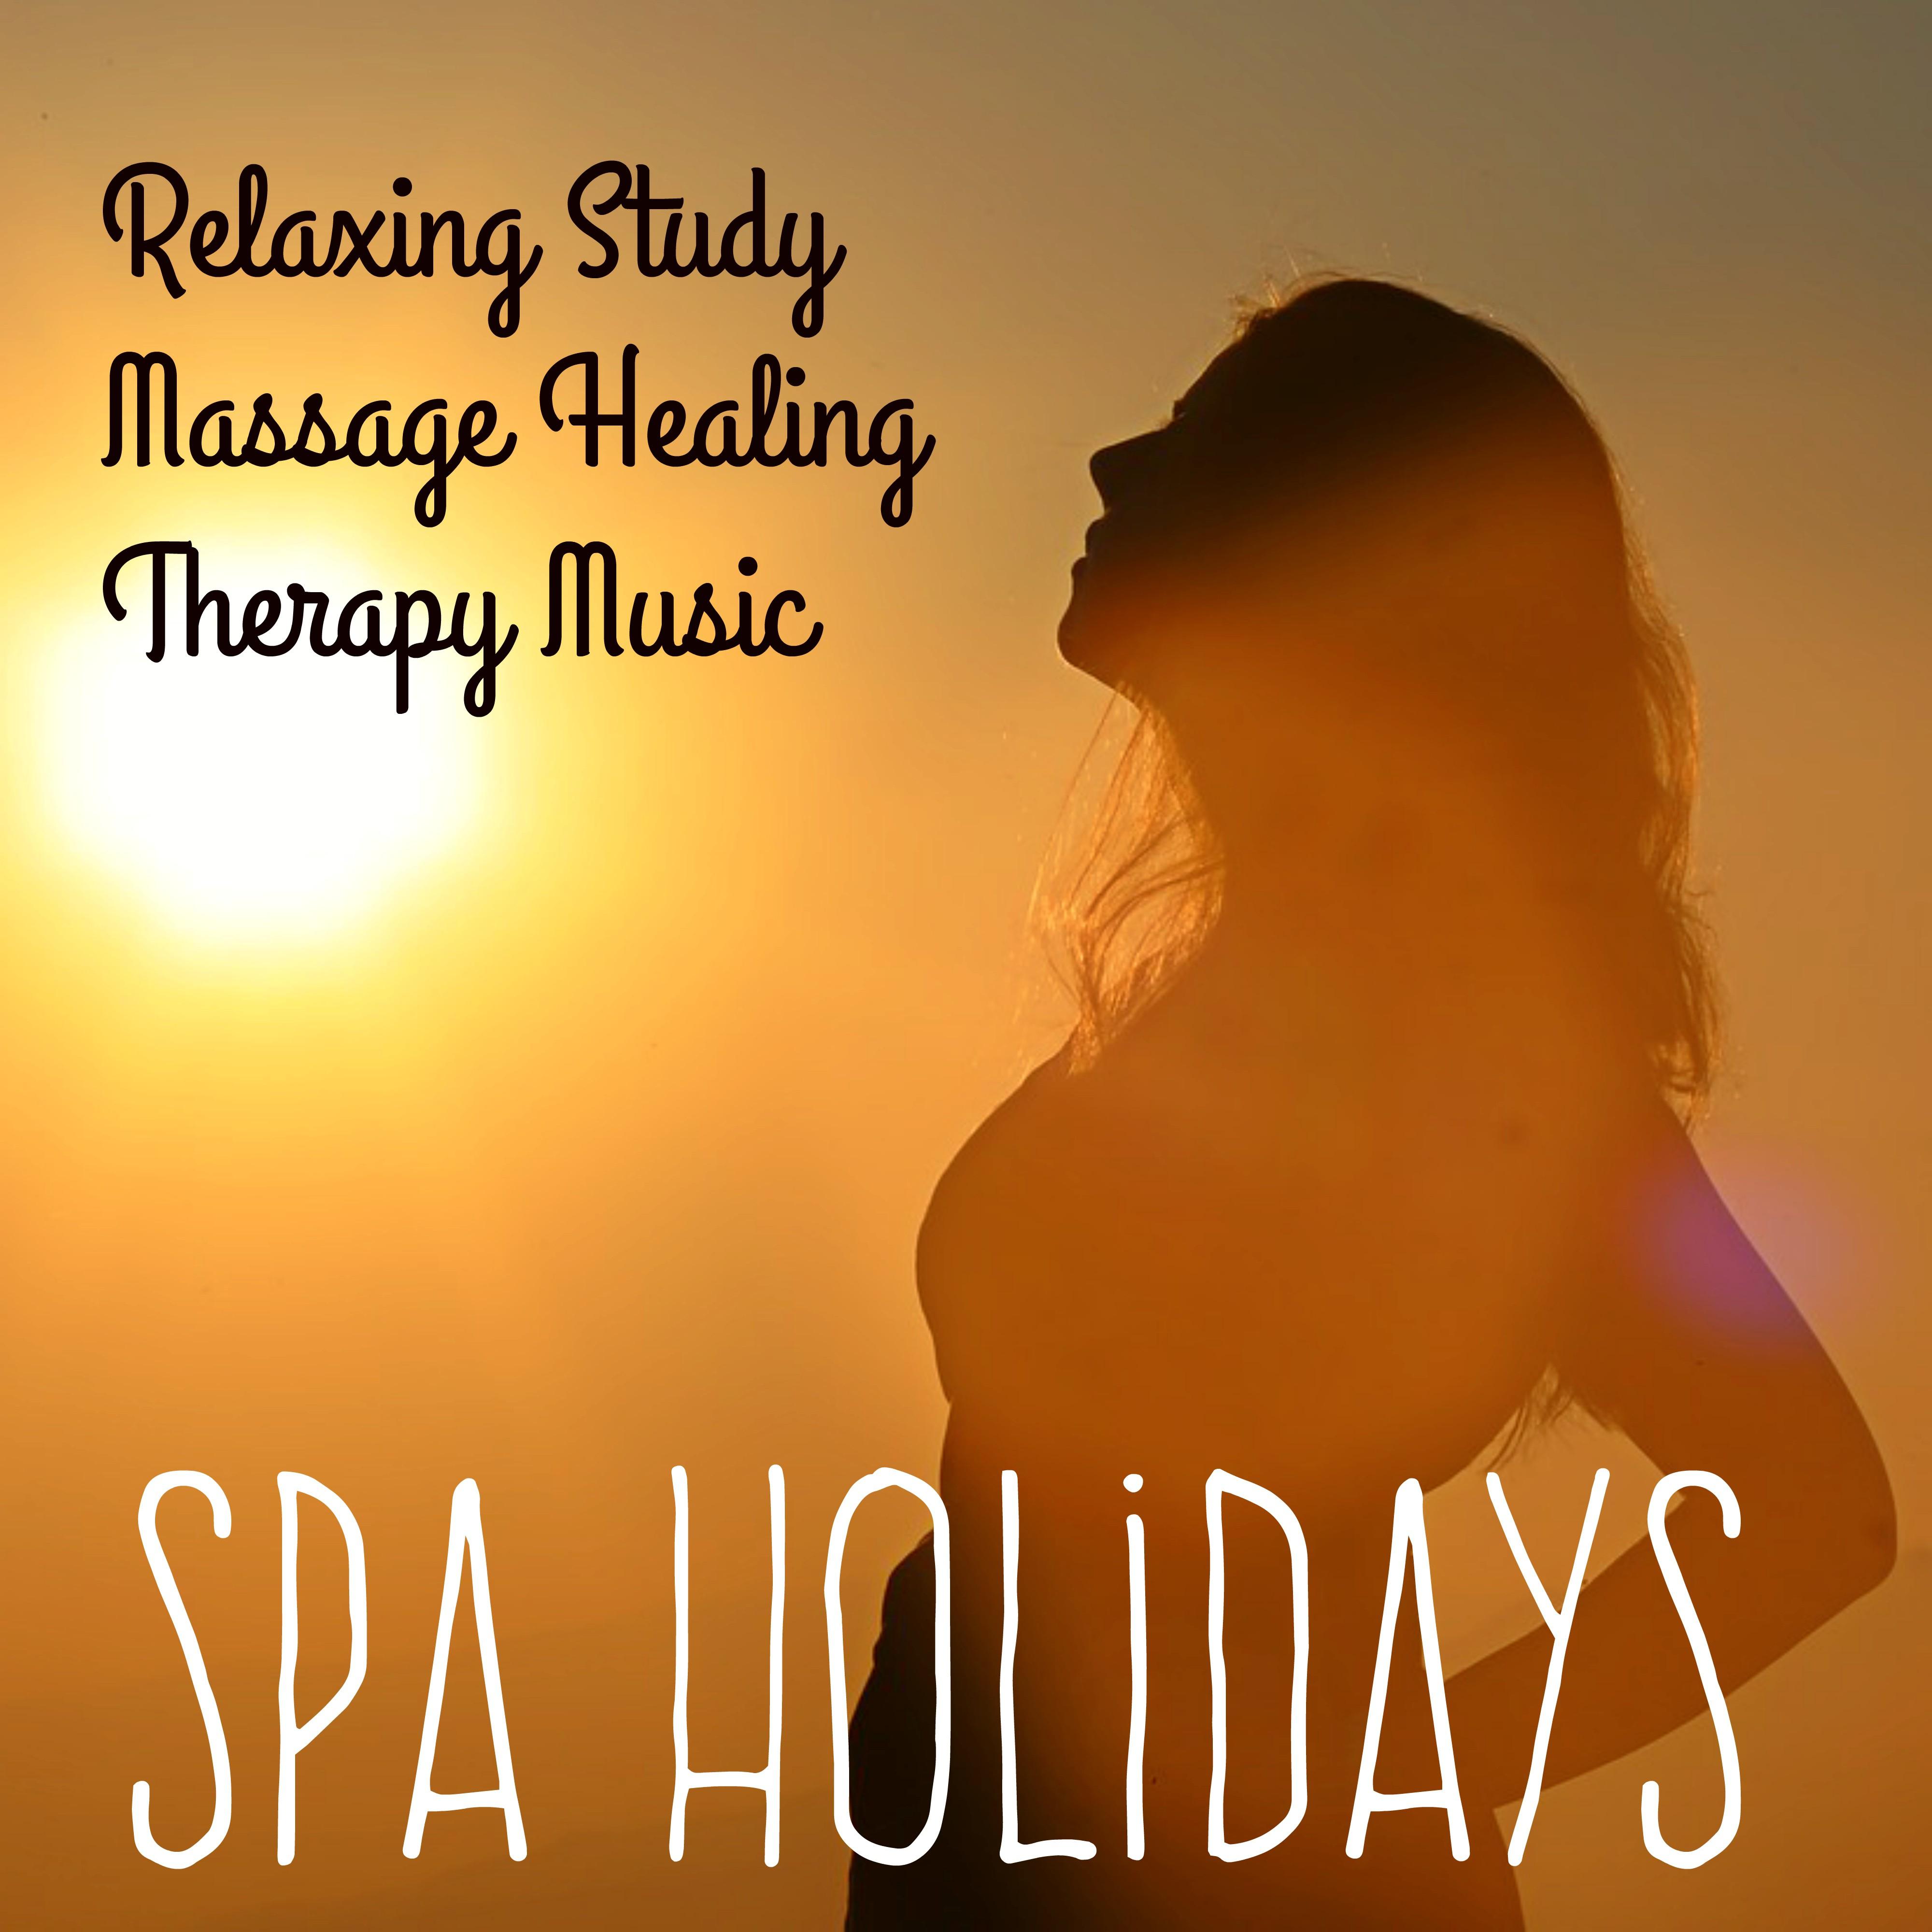 Spa Holidays - Relaxing Study Massage Healing Therapy Music for Deep Concentration Awareness Wellness Programs with Meditative Spiritual Instrumental New Age Sounds